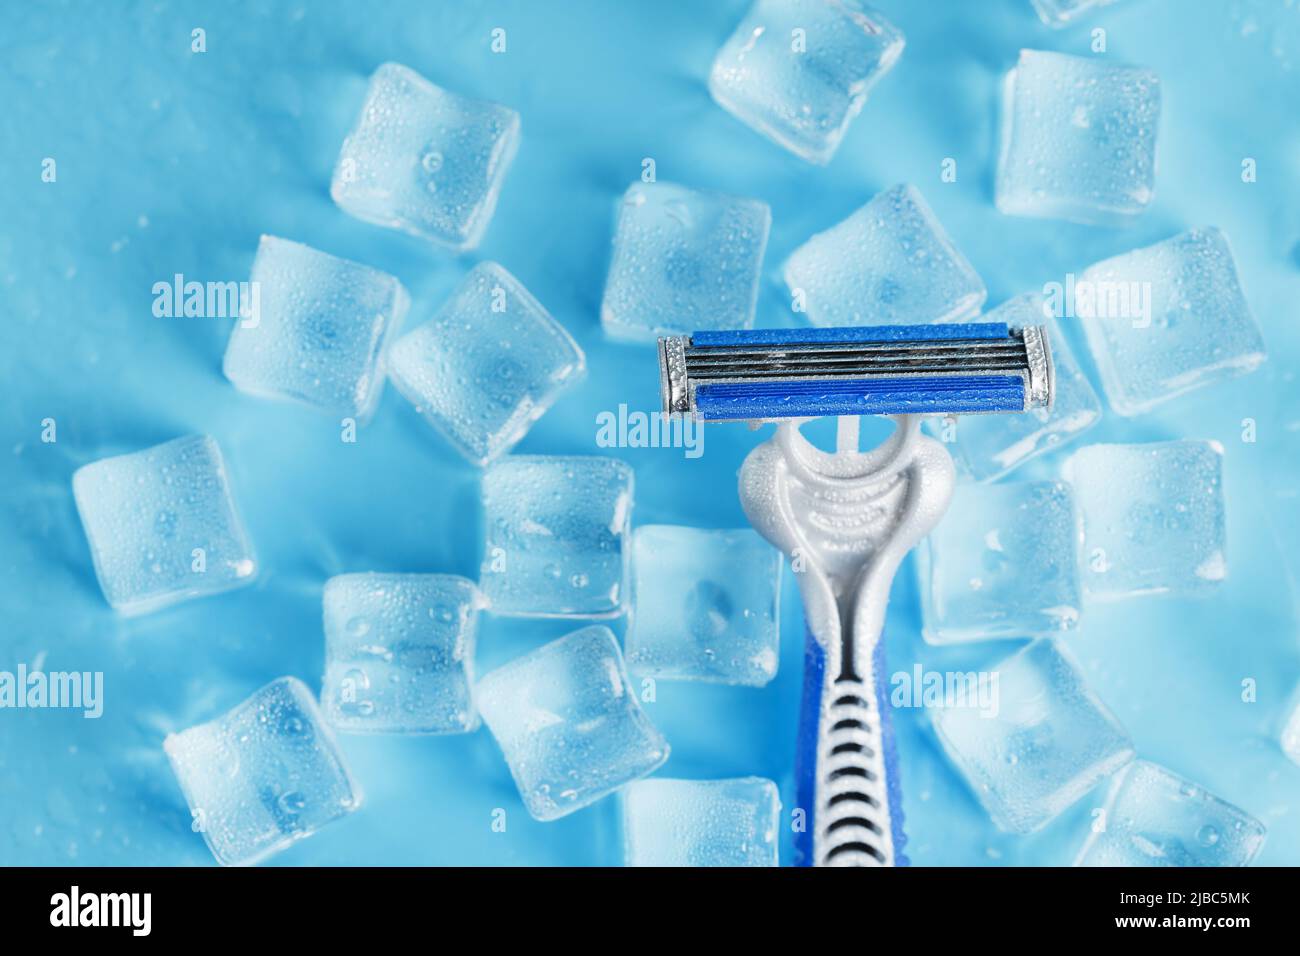 Shaving machine on a blue background with ice cubes. The concept of cleanliness and frosty freshness Stock Photo